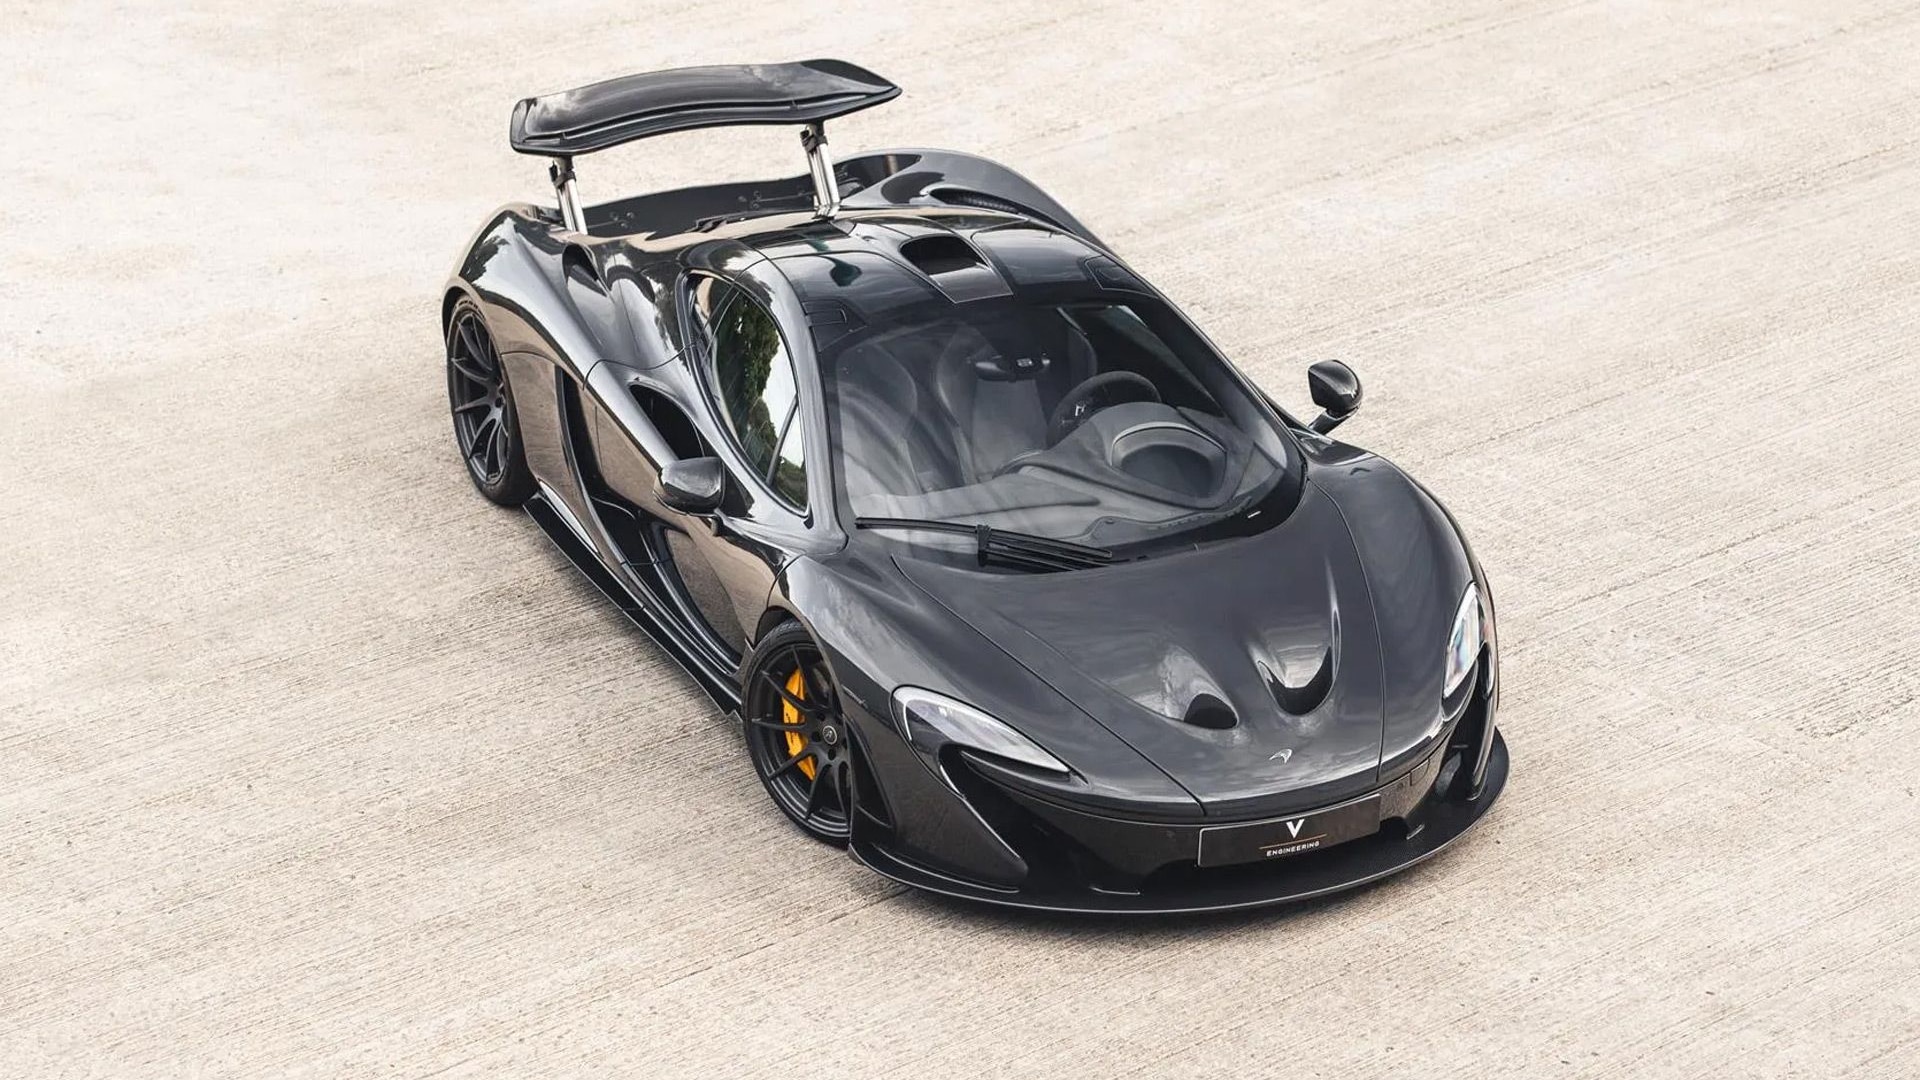 McLaren P1 first owned by Jenson Button - Photo credit: V Management/Piston Heads